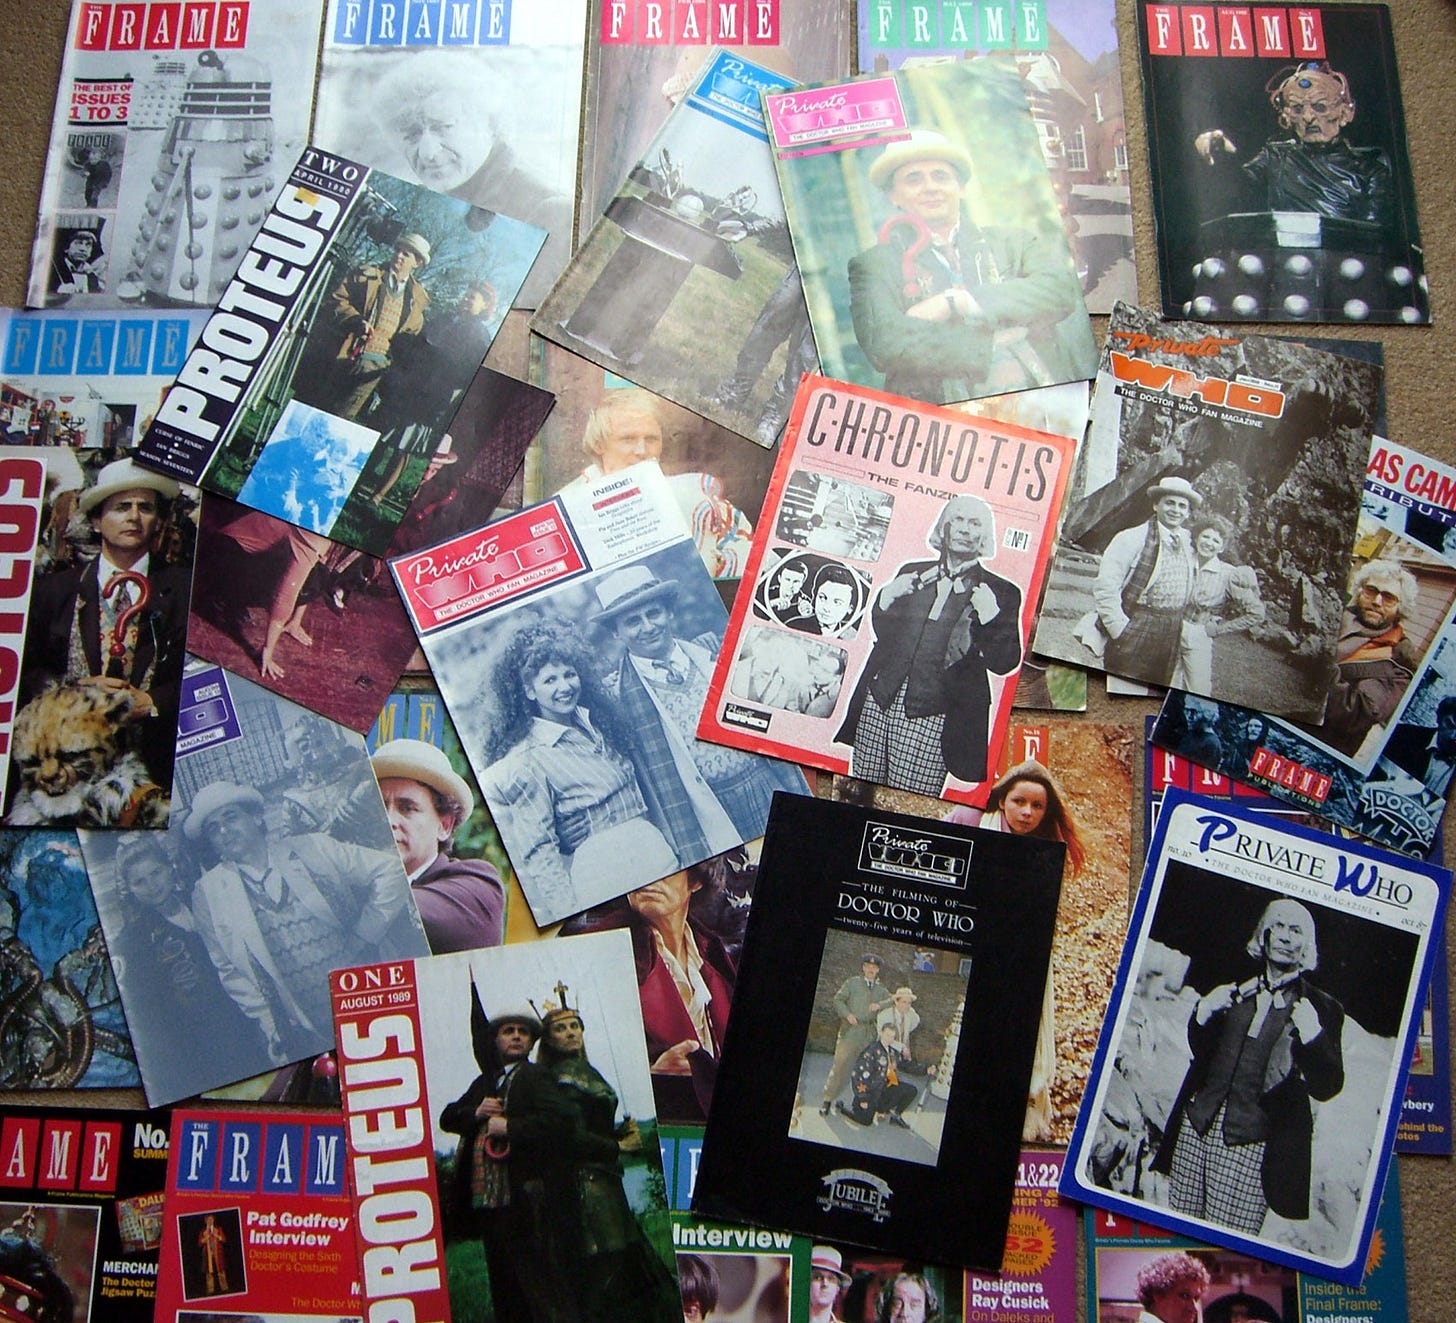 A selection of glossy A4 fanzines